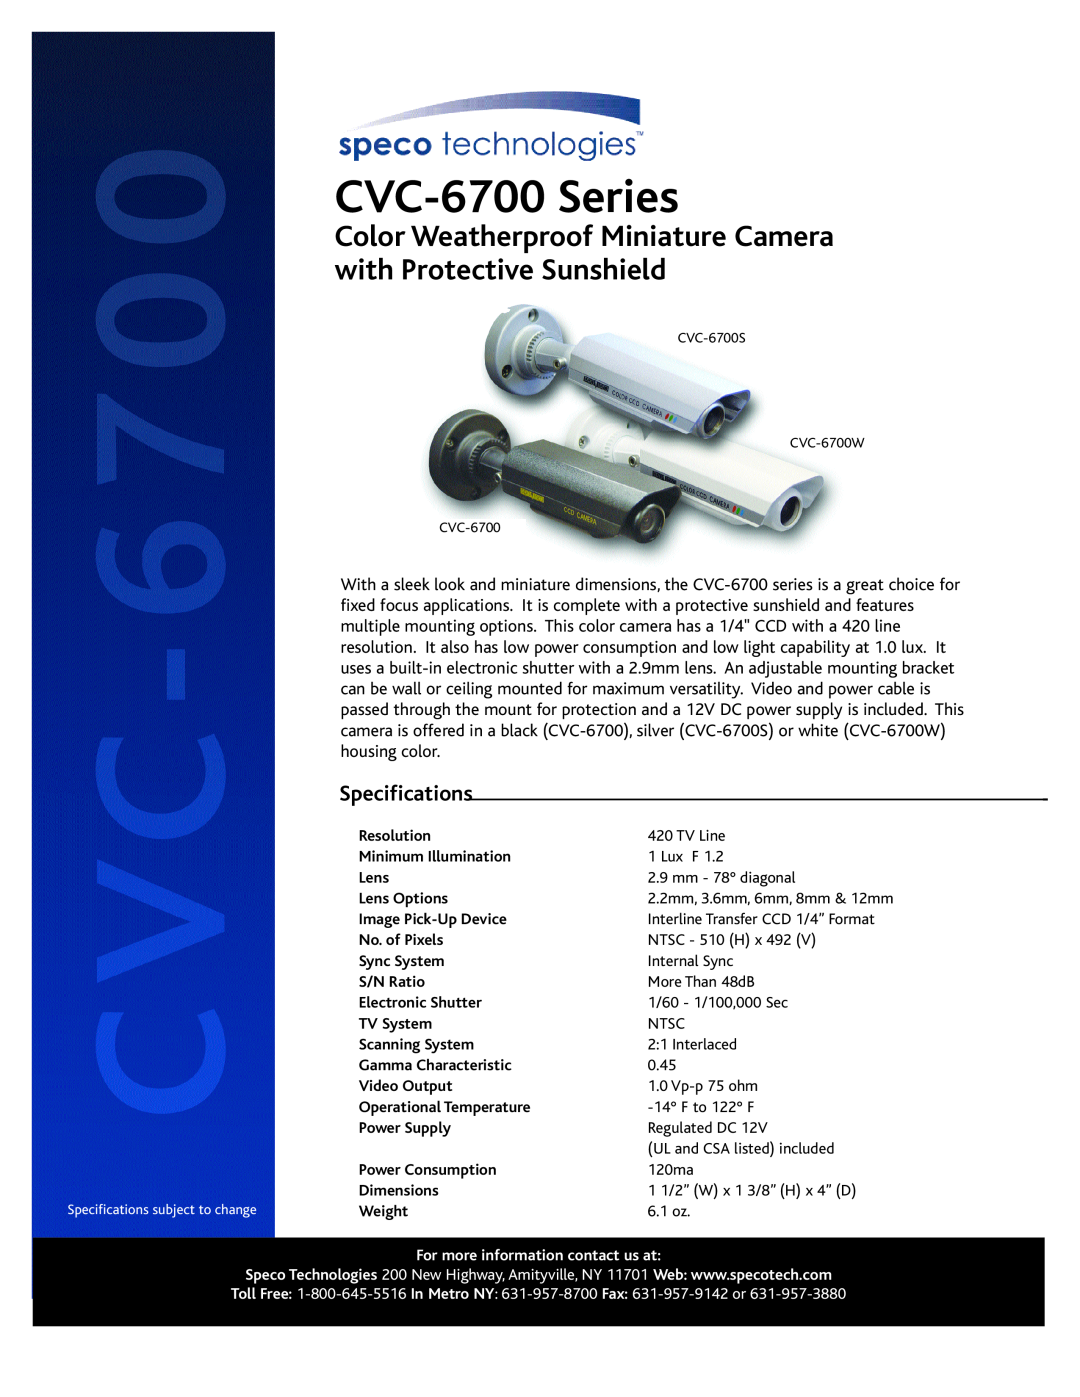 Speco Technologies CVC-6700 Series specifications Color Weatherproof Miniature Camera with Protective Sunshield 